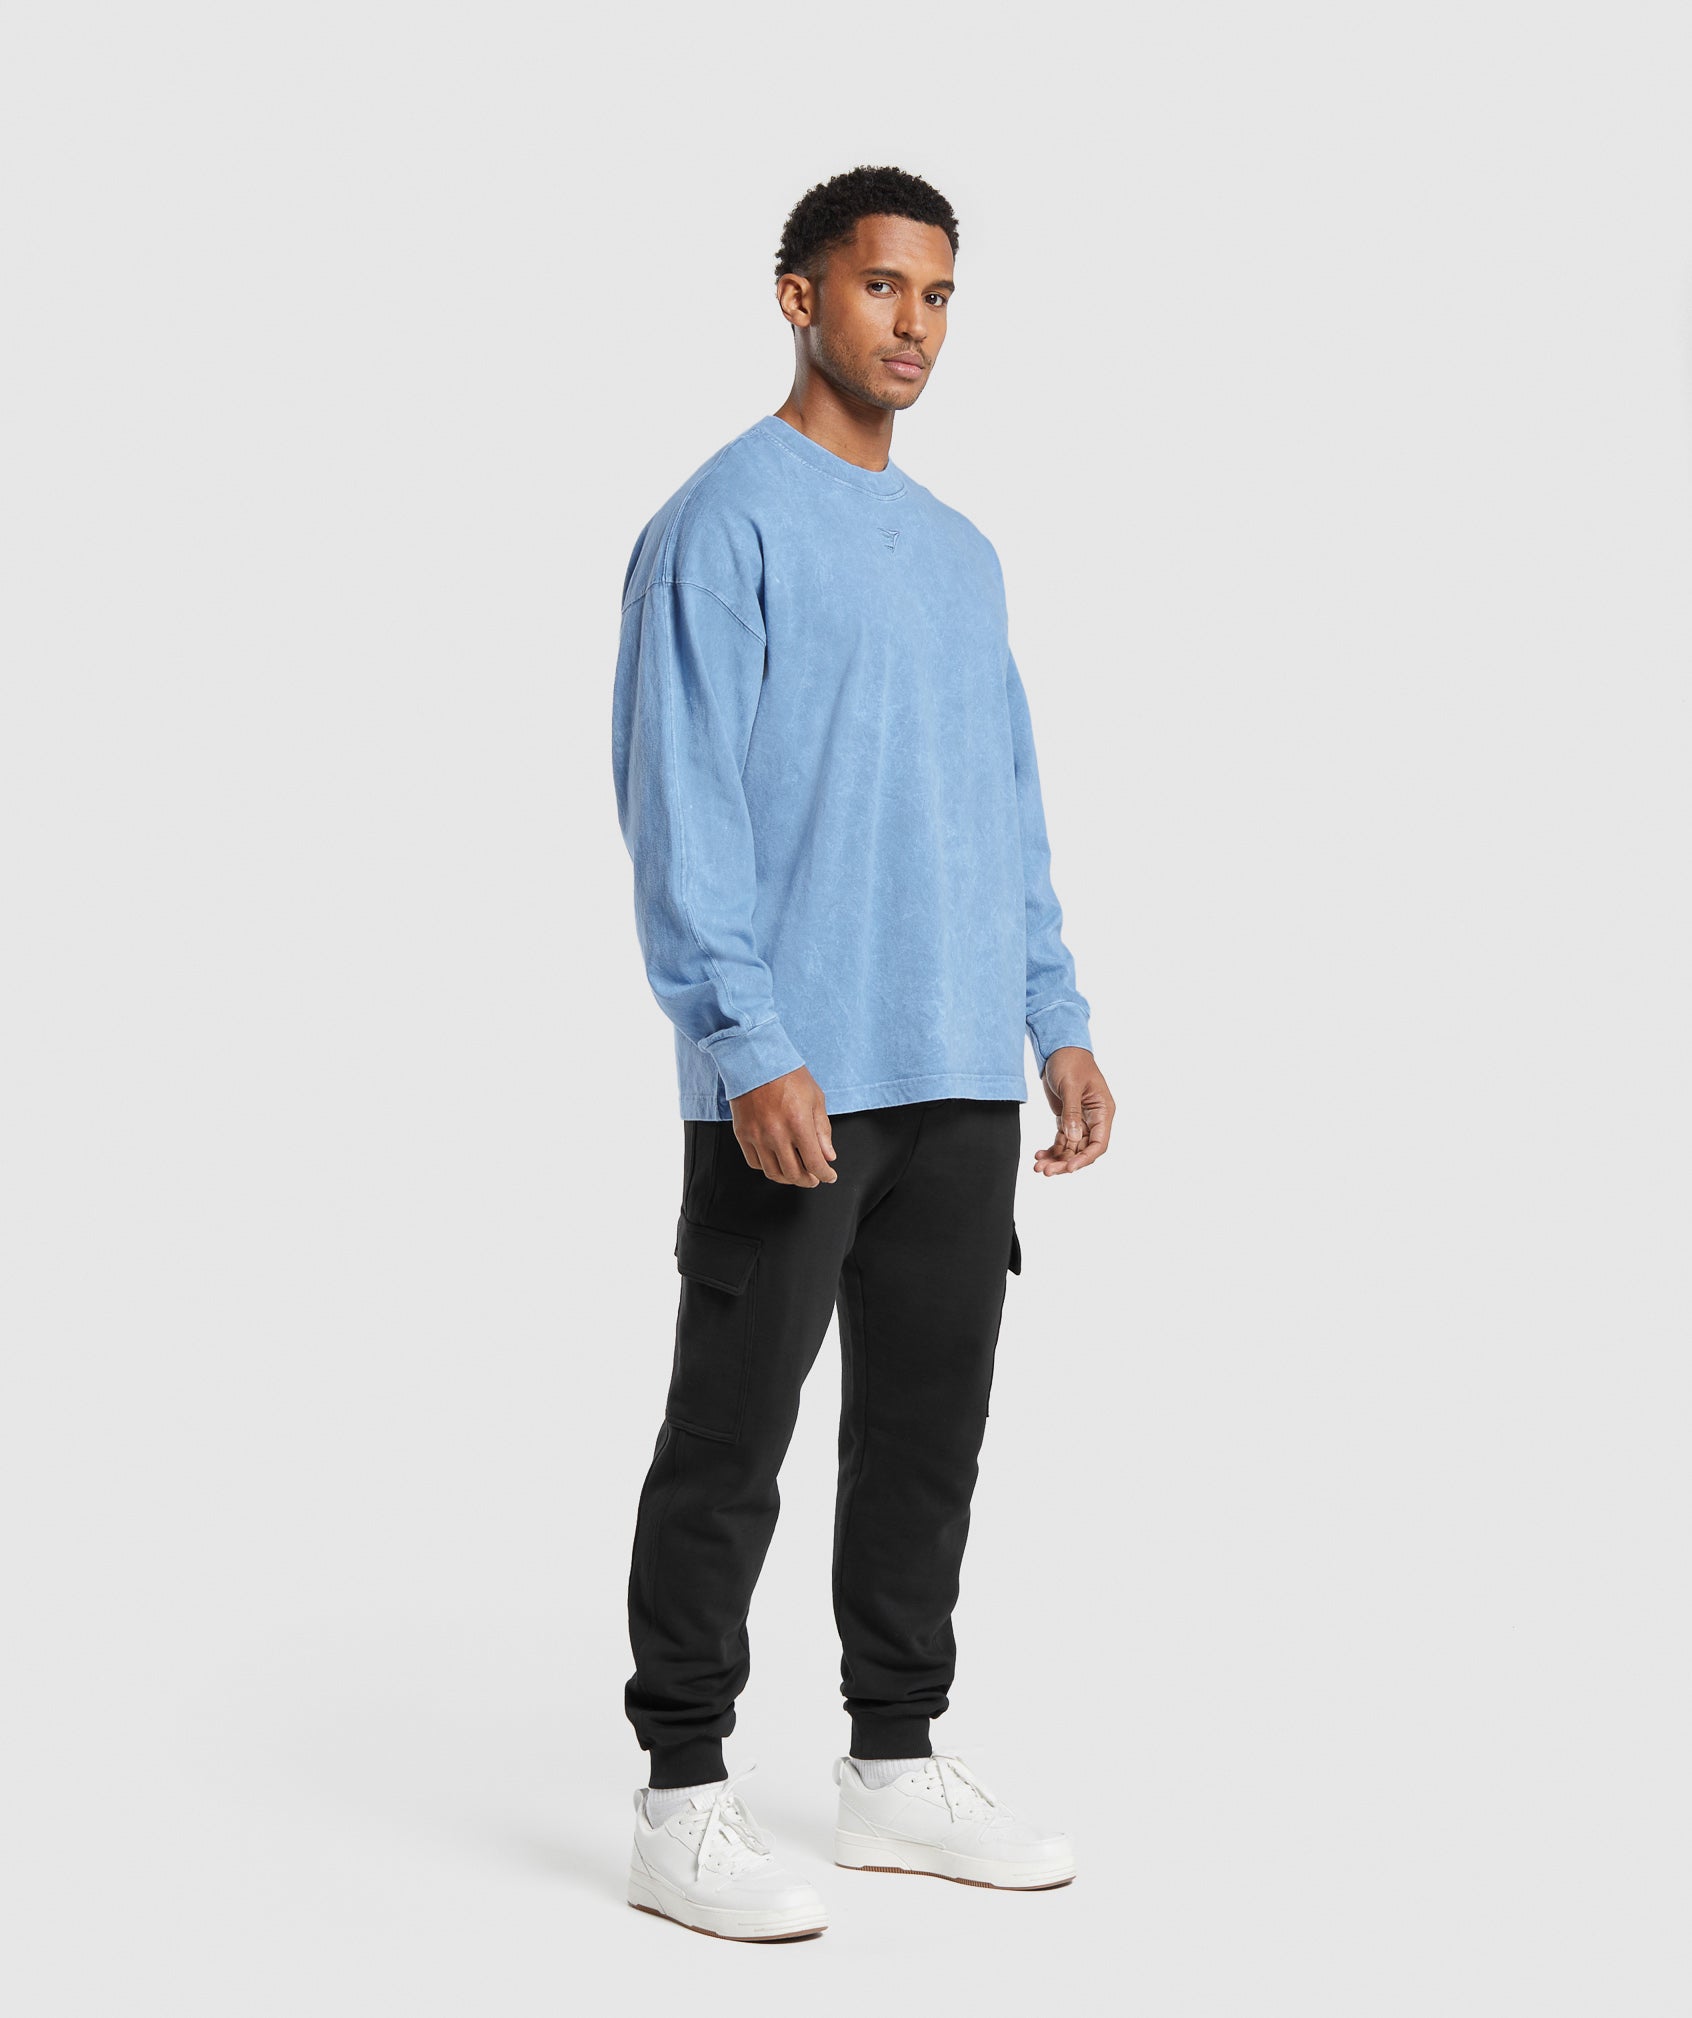 Rest Day Washed Long Sleeve T-Shirt in Faded Blue - view 4